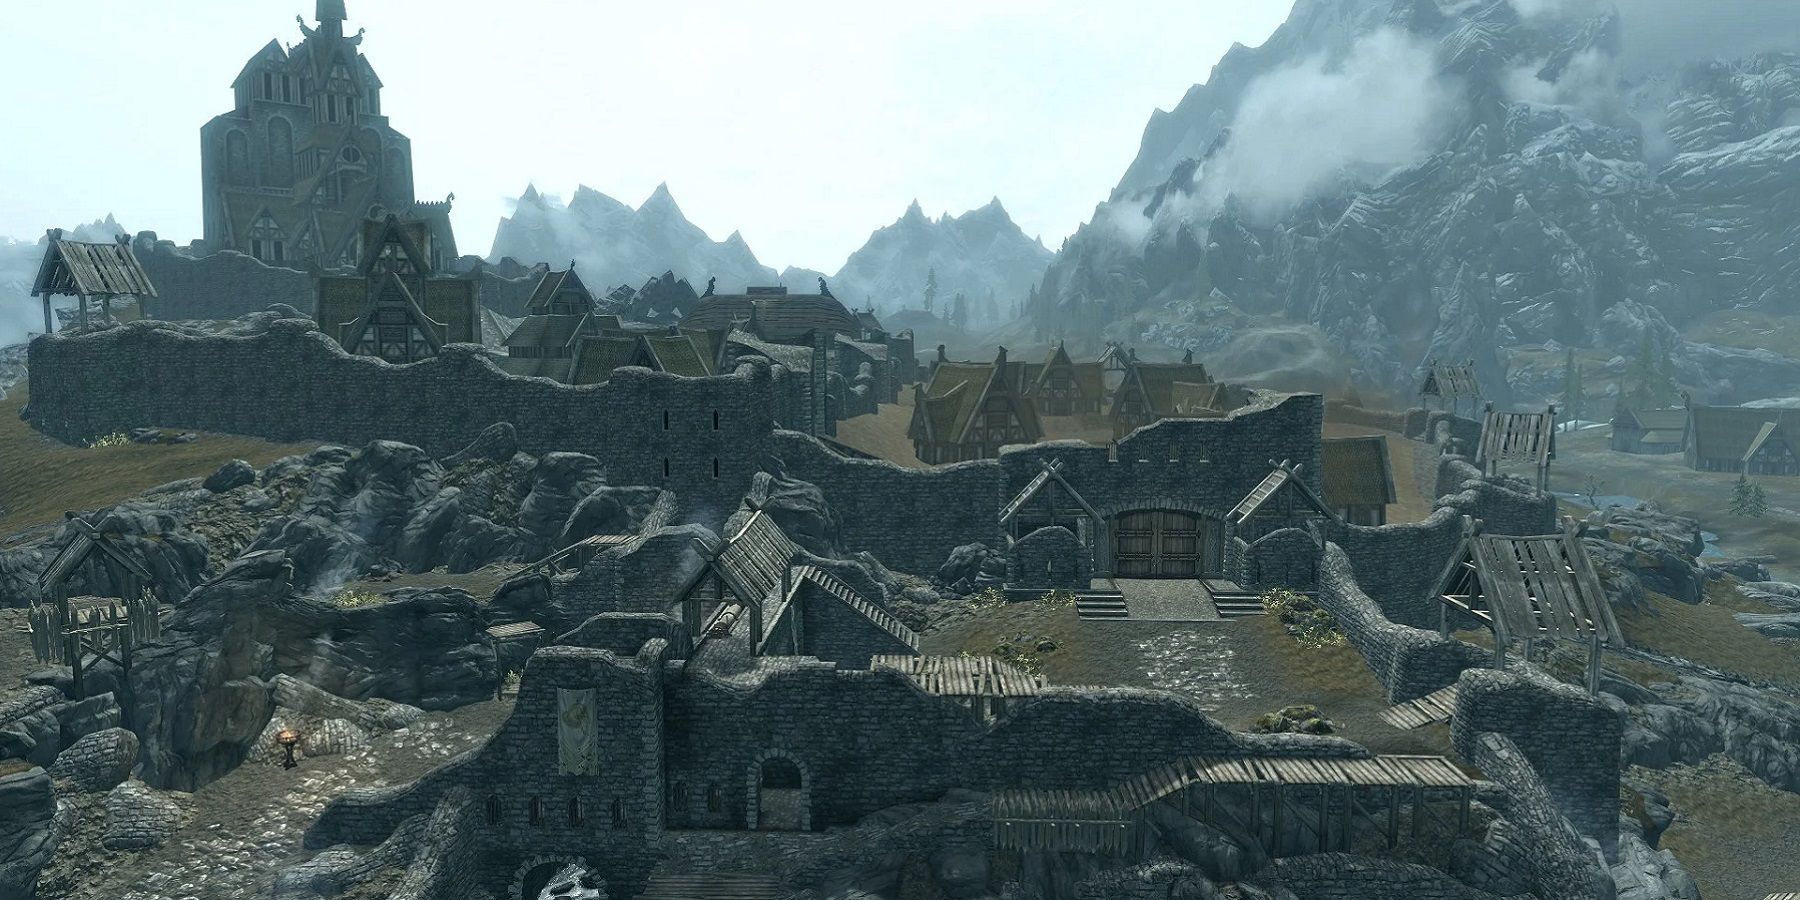 A wide angle screenshot from Skyrim showing the whole city of Whiterun.